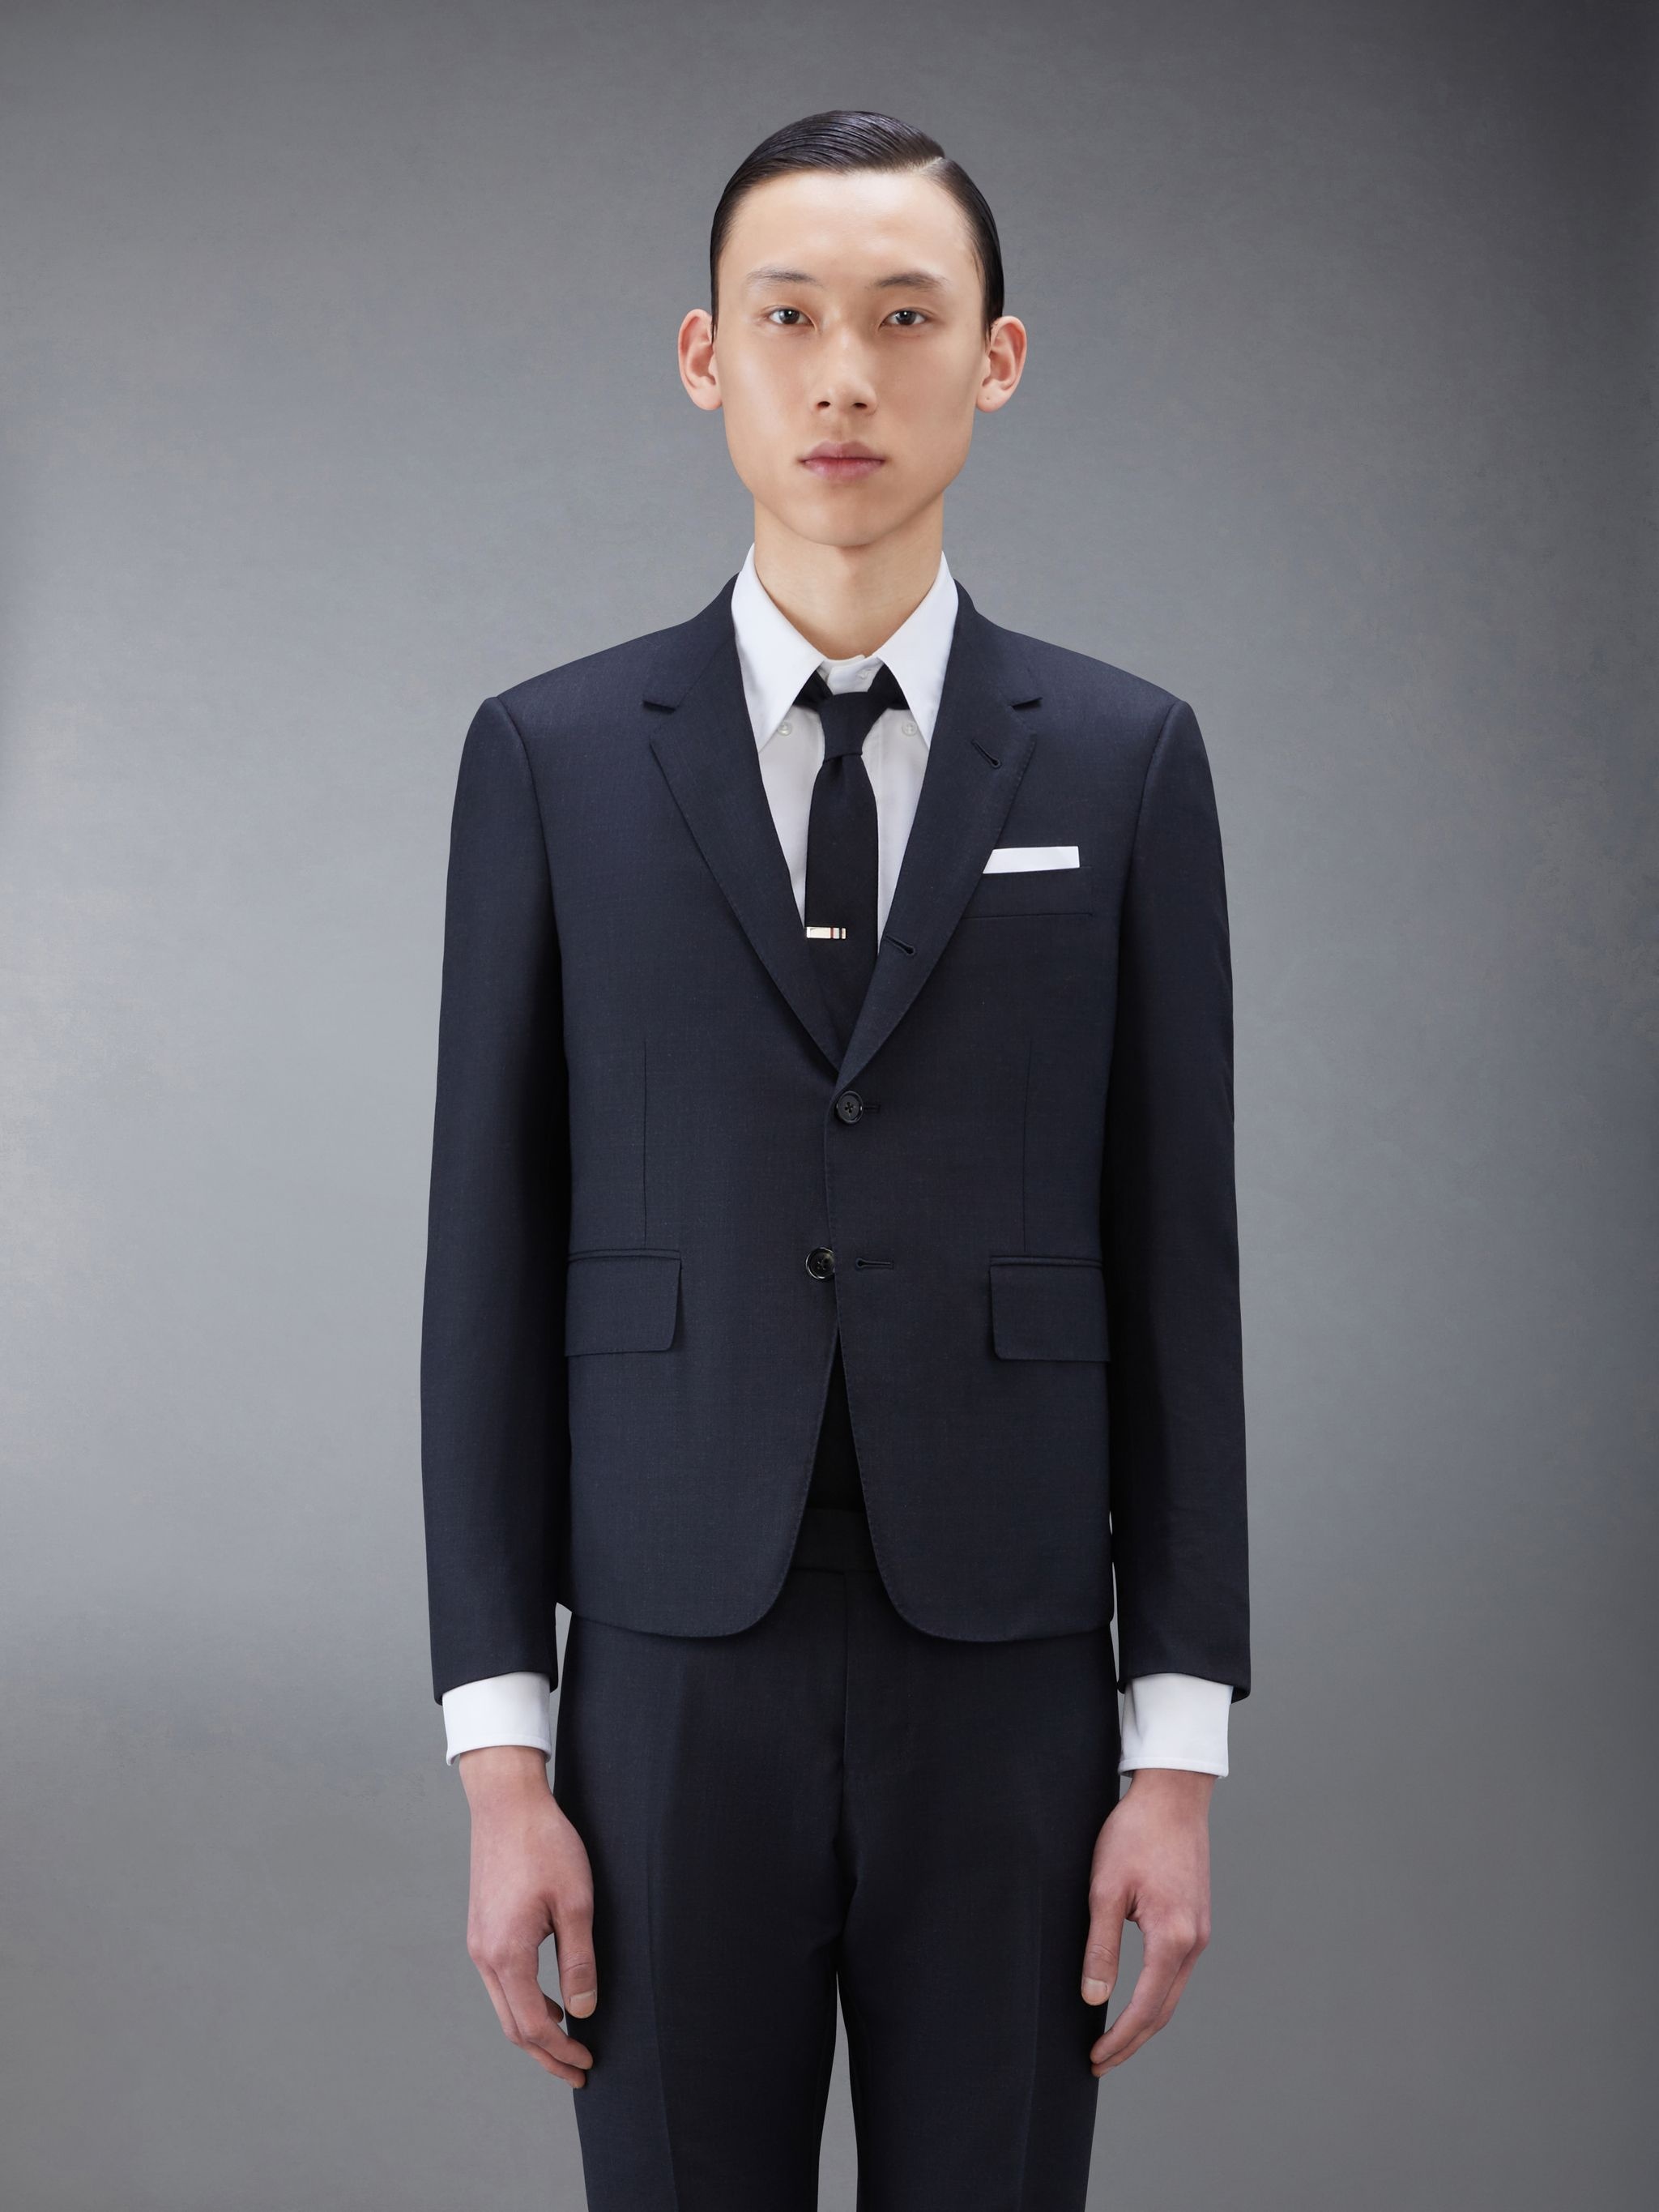 CHARCOAL GREY SUPER 120S TWILL HIGH ARMHOLE SUIT WITH TIE AND LOW RISE SKINNY TROUSER - 3